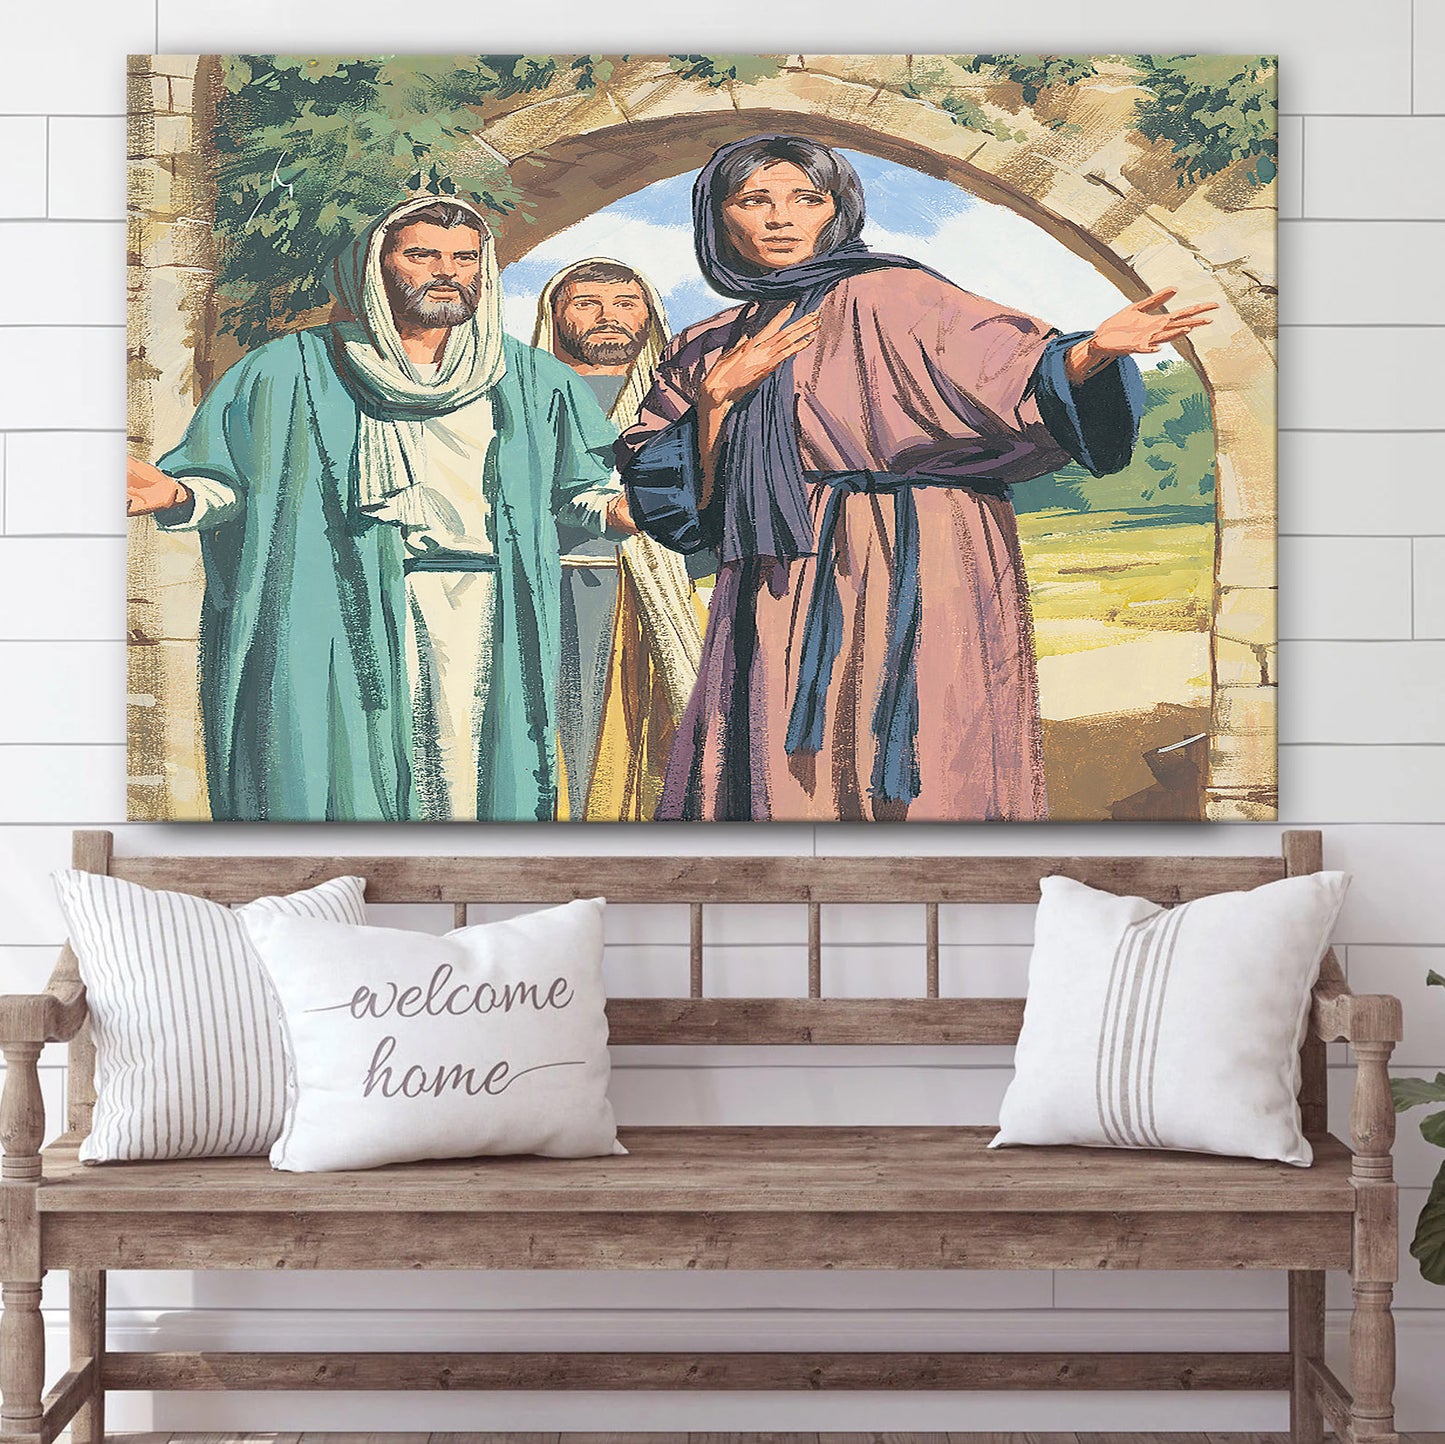 Mary Peter And John Magdalene New Testament Stories Canvas Wall Art - Christian Canvas Pictures - Religious Canvas Wall Art